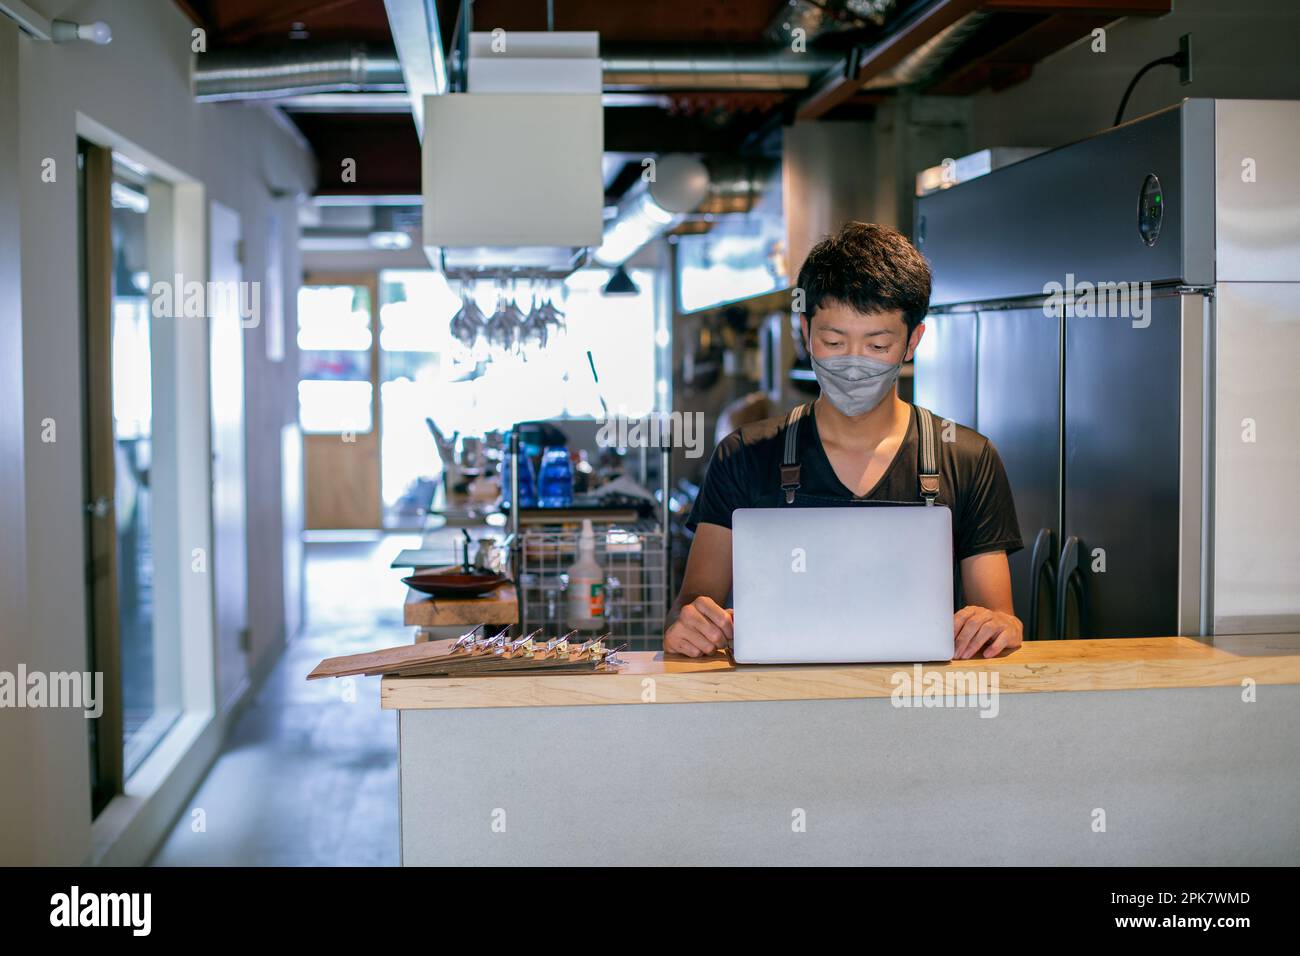 A man in a face mask in a restaurant kitchen, using a laptop, the owner or manager. Stock Photo